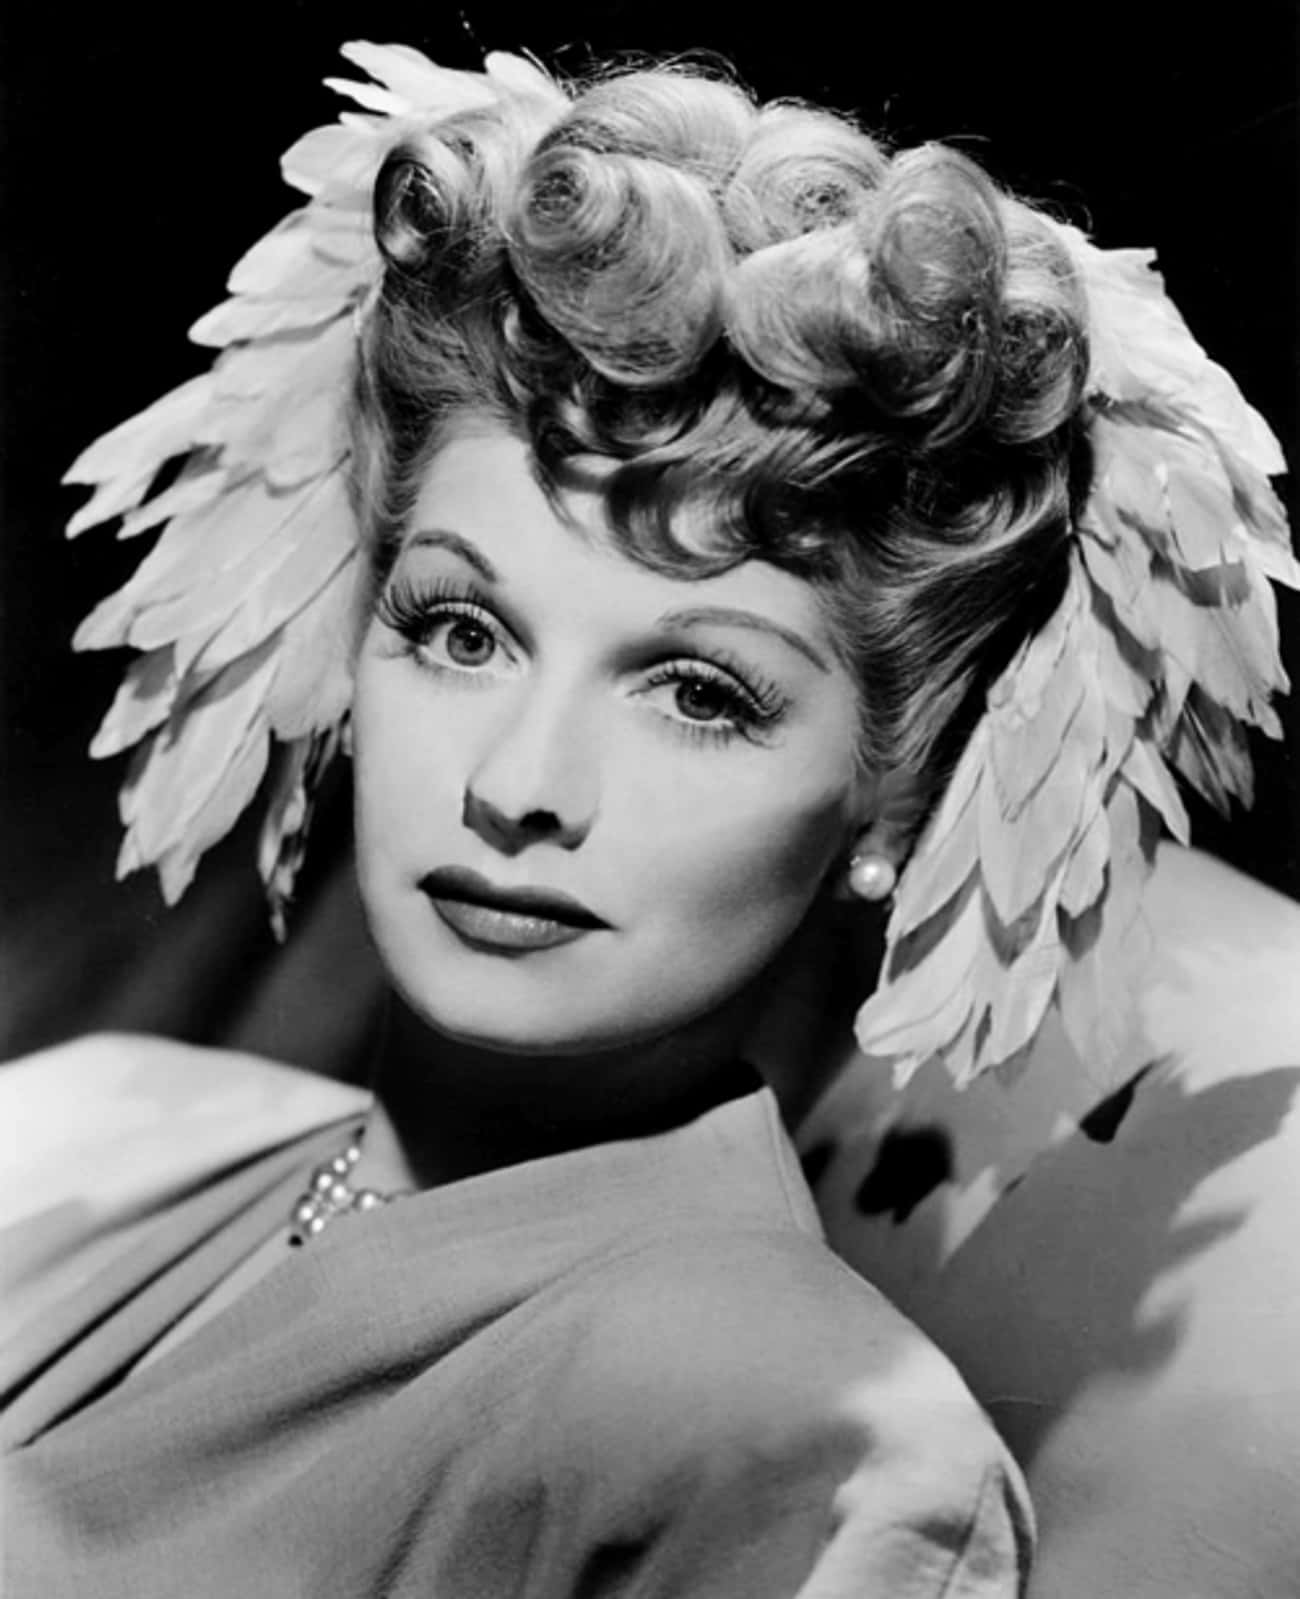 Young Lucille Ball with White Feathers in Hair